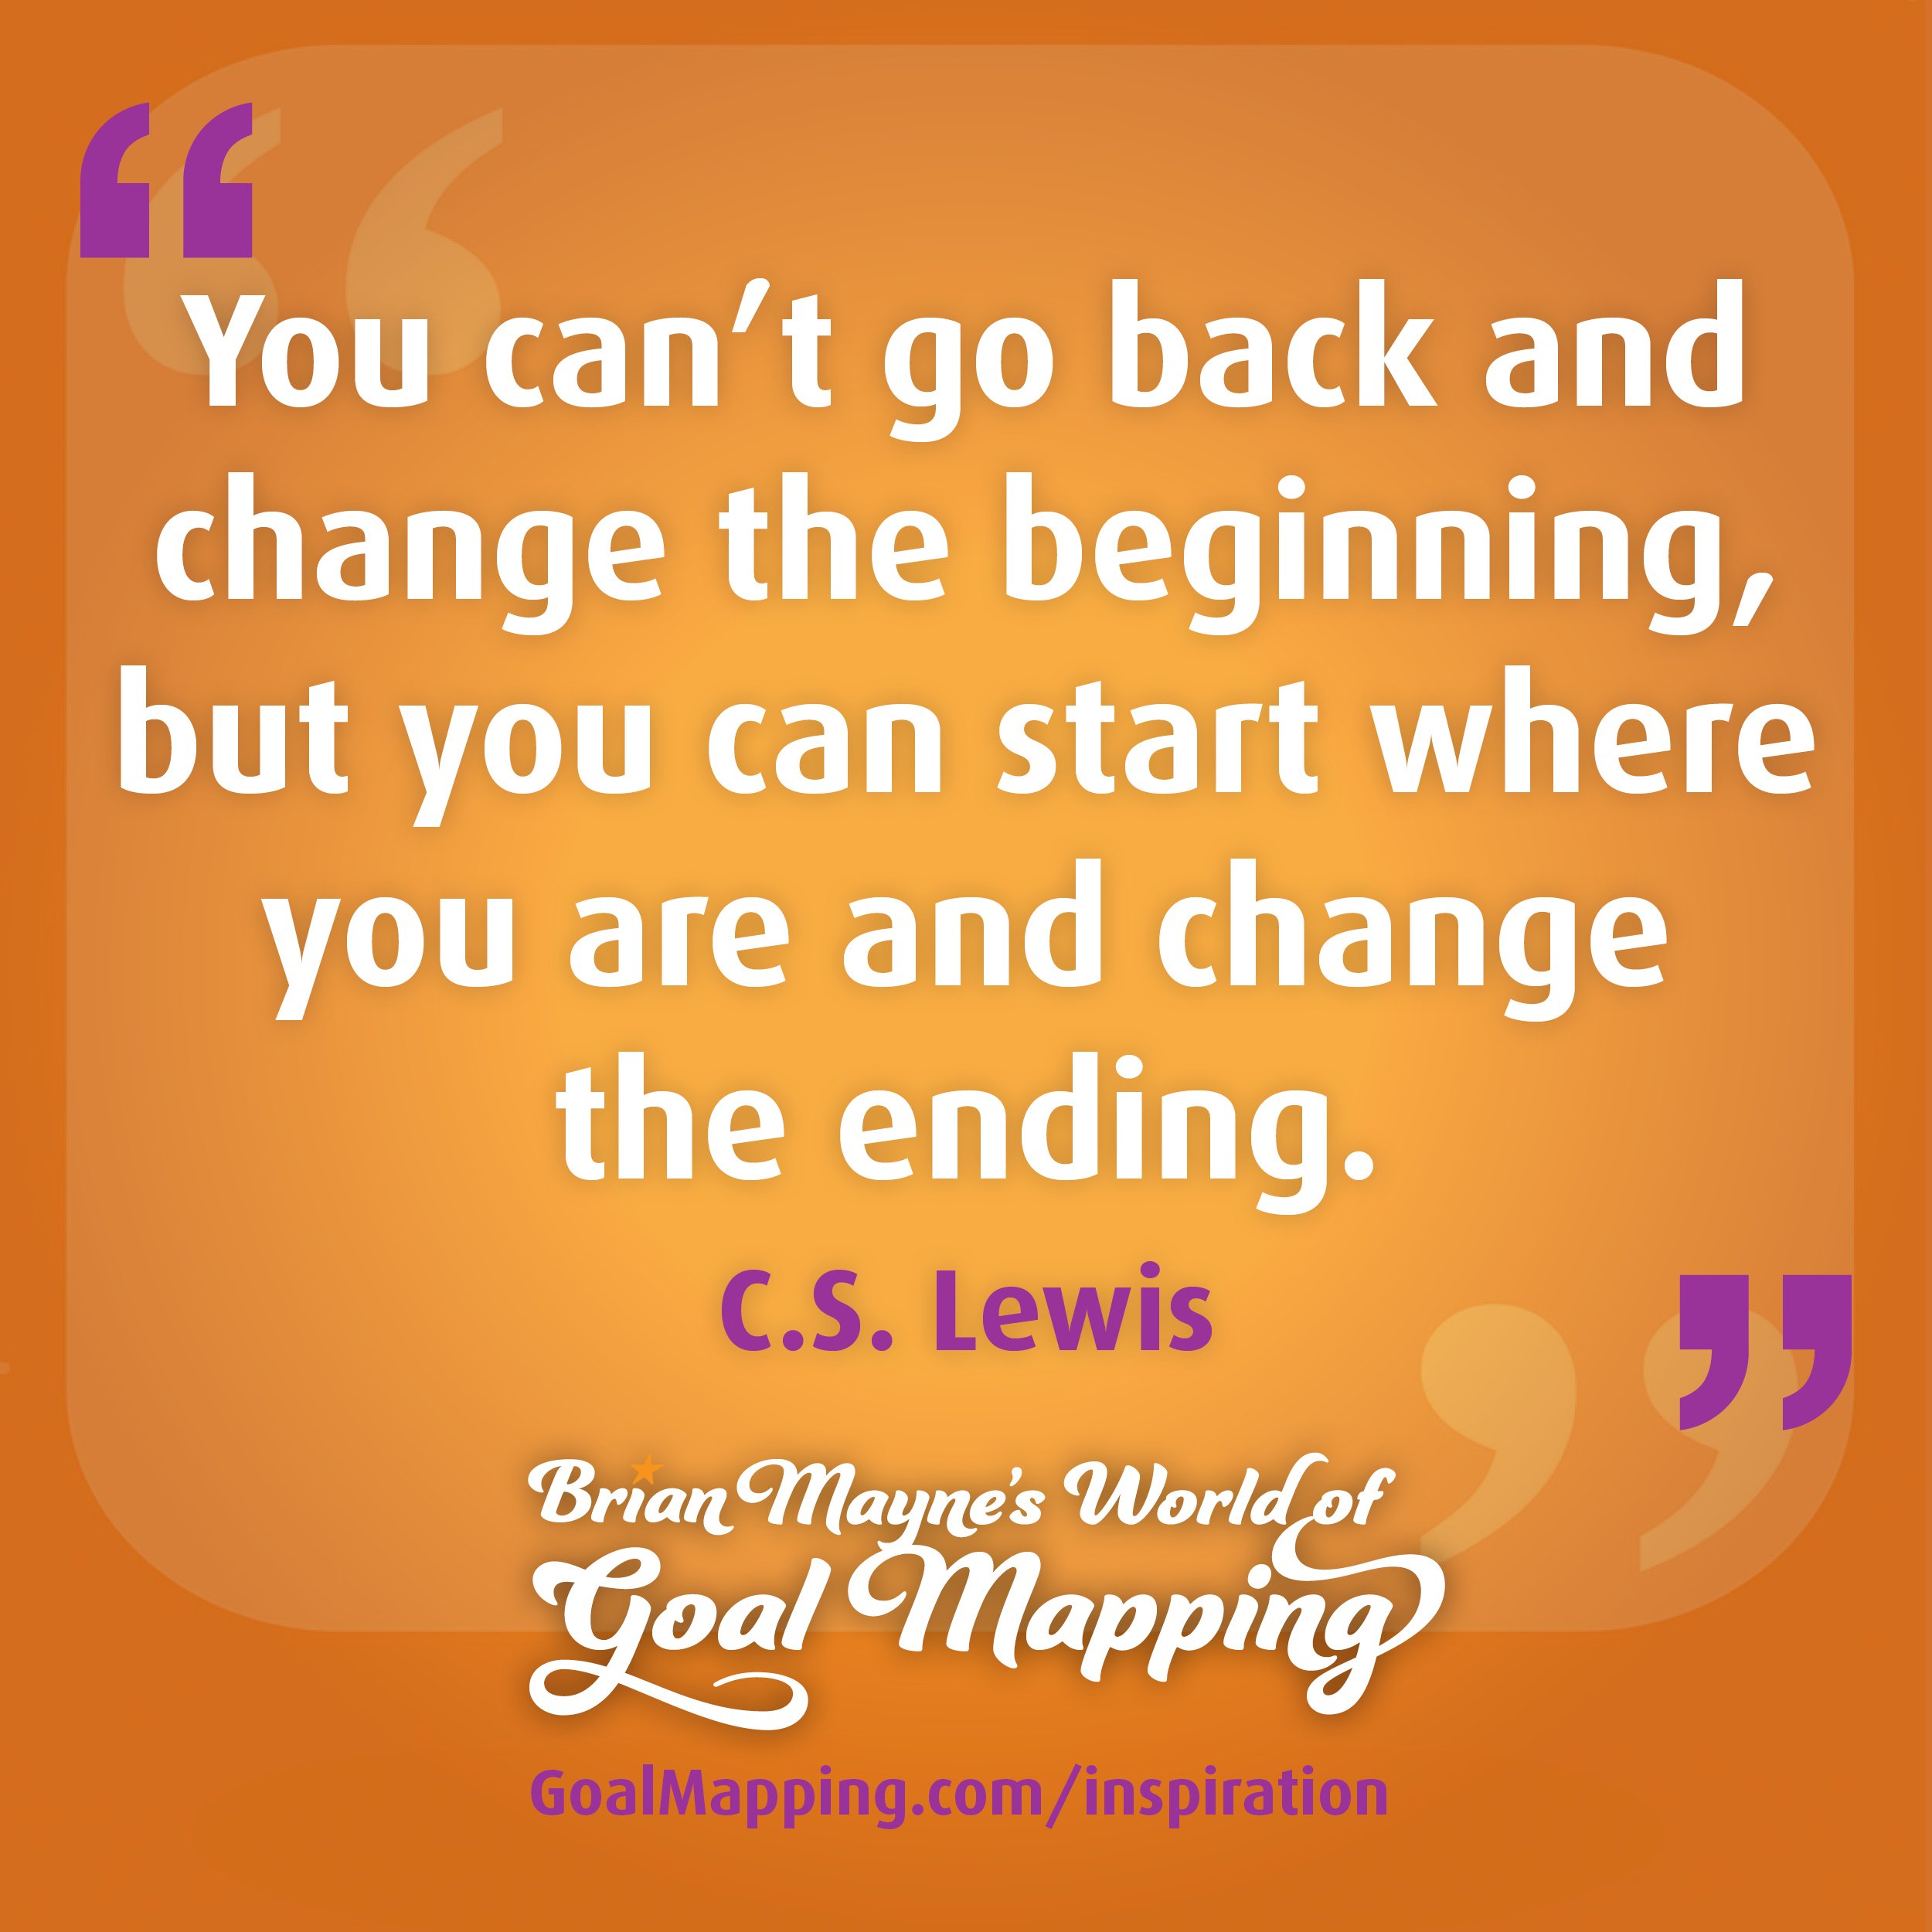 "You can’t go back and change the beginning, but you can start where you are and change the ending." C.S. Lewis